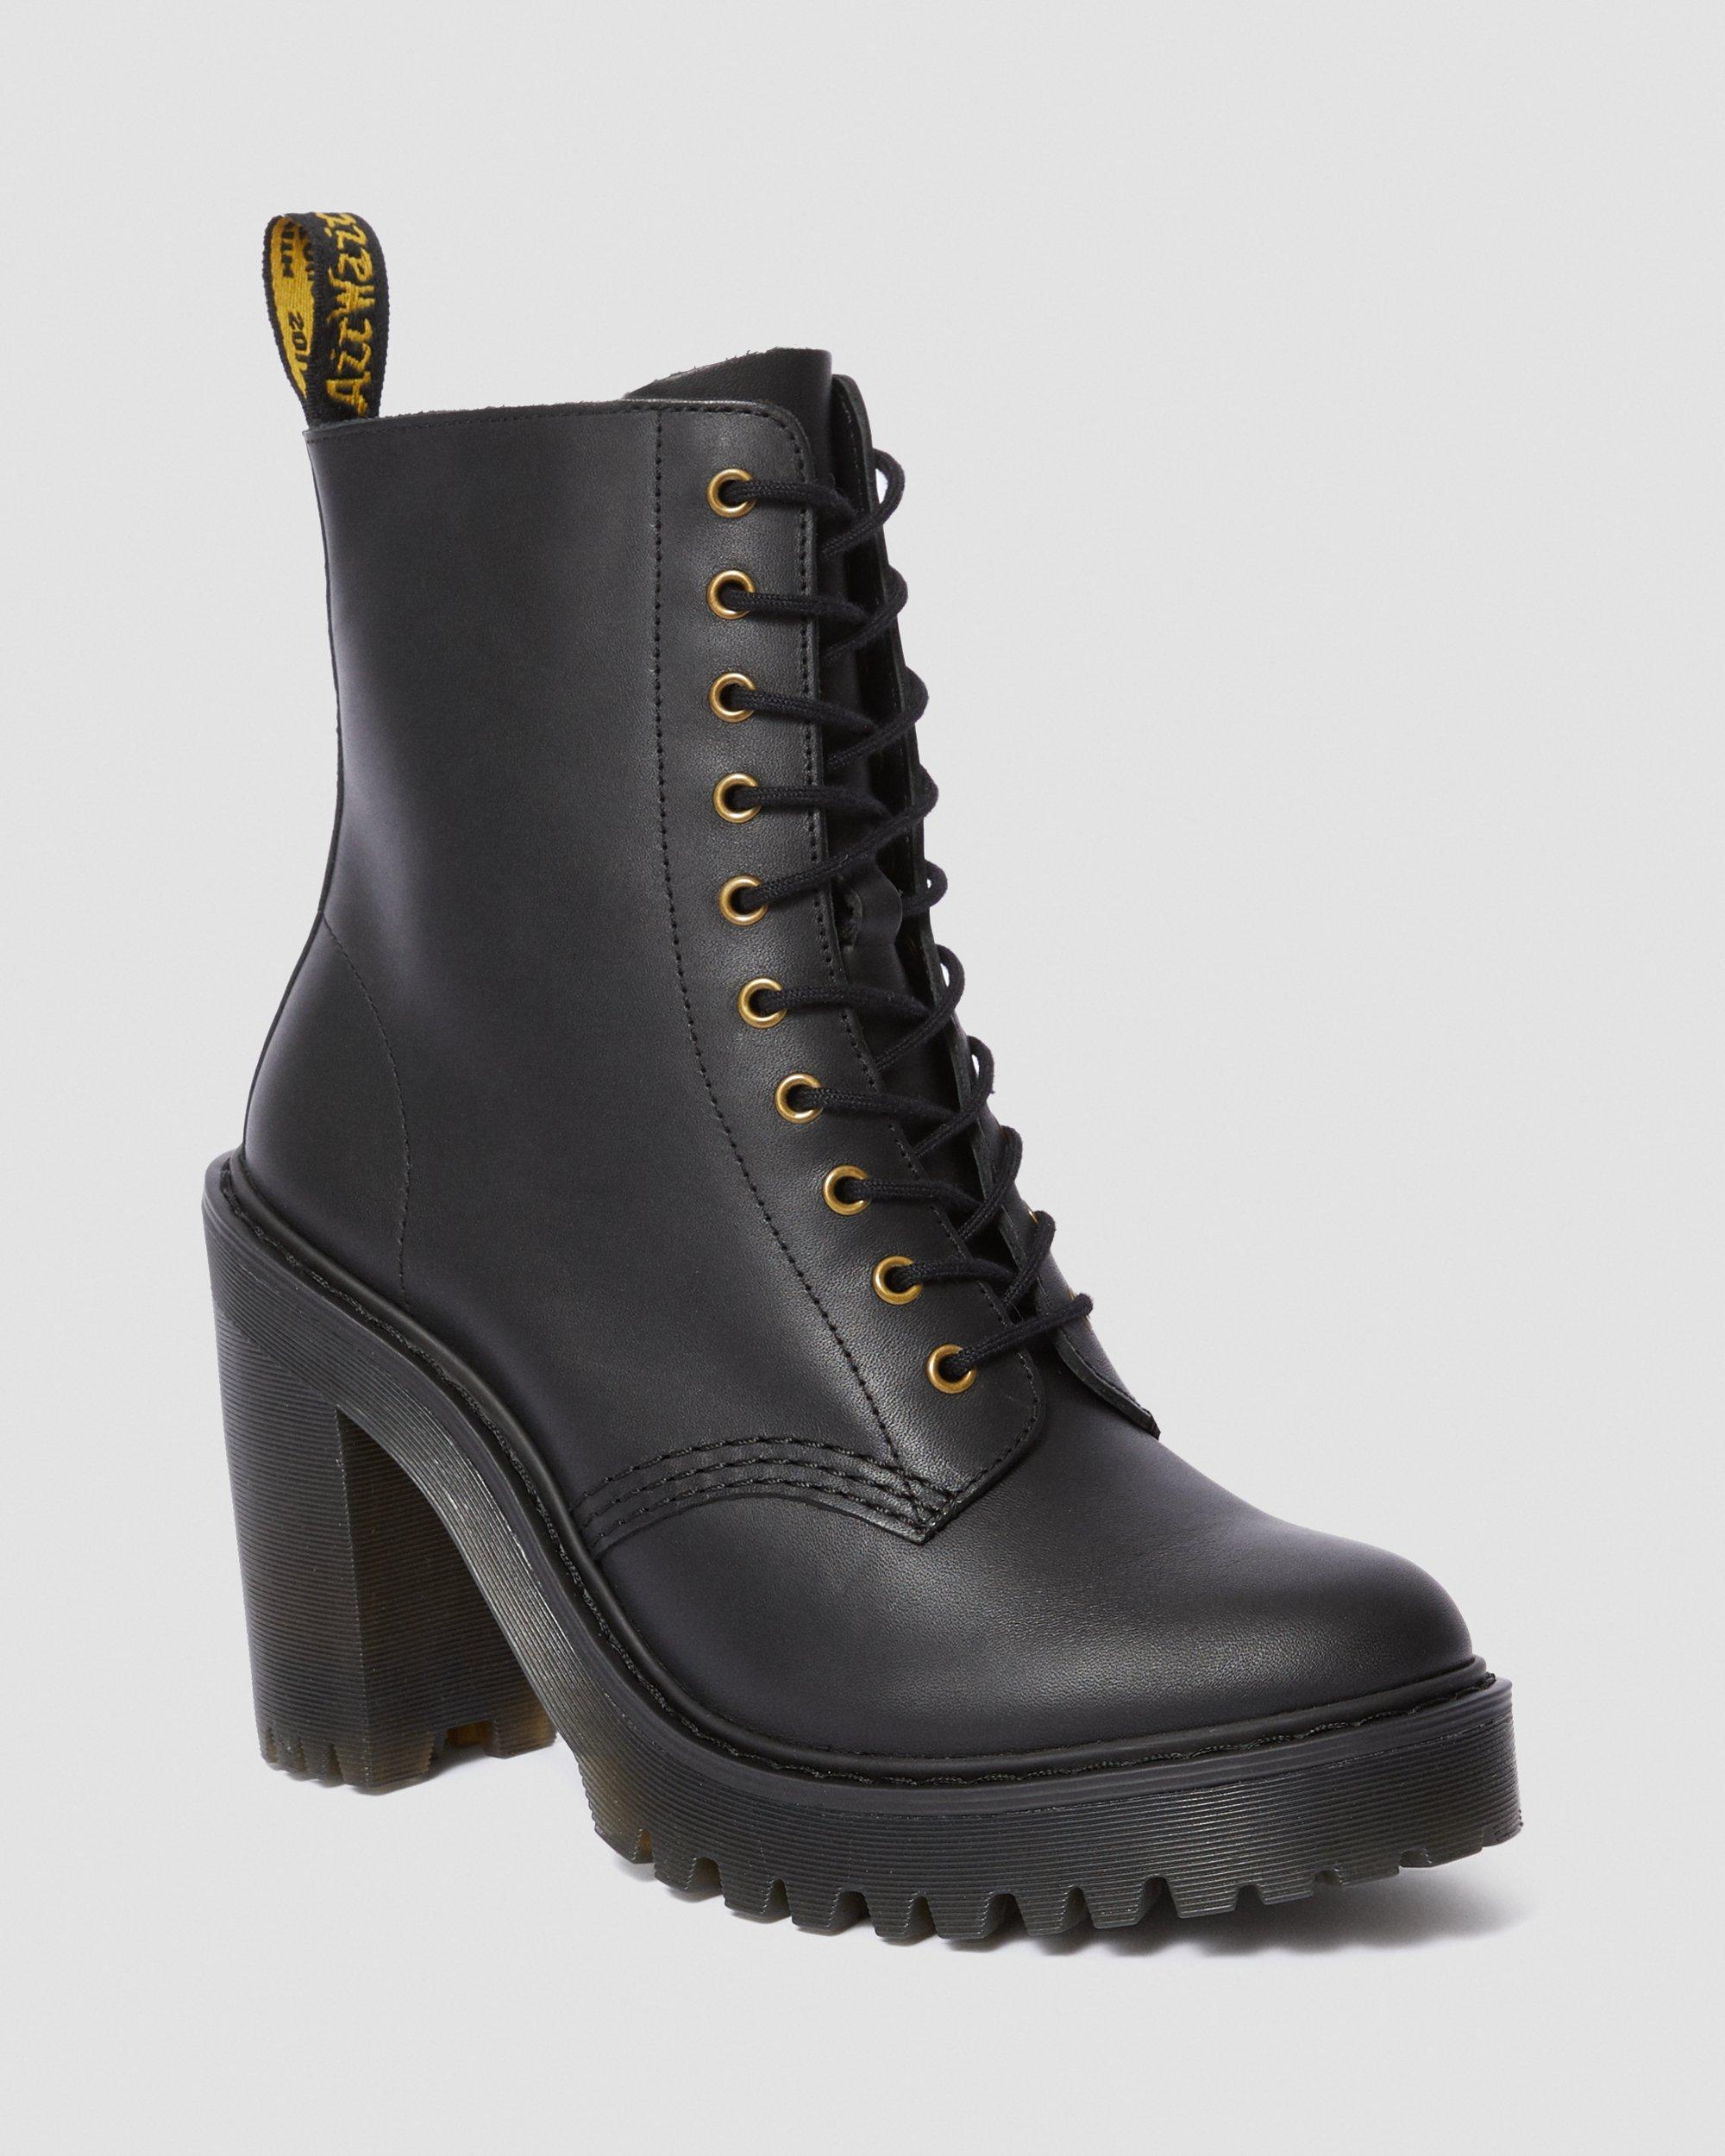 DR MARTENS Kendra Women's Leather Heeled Boots